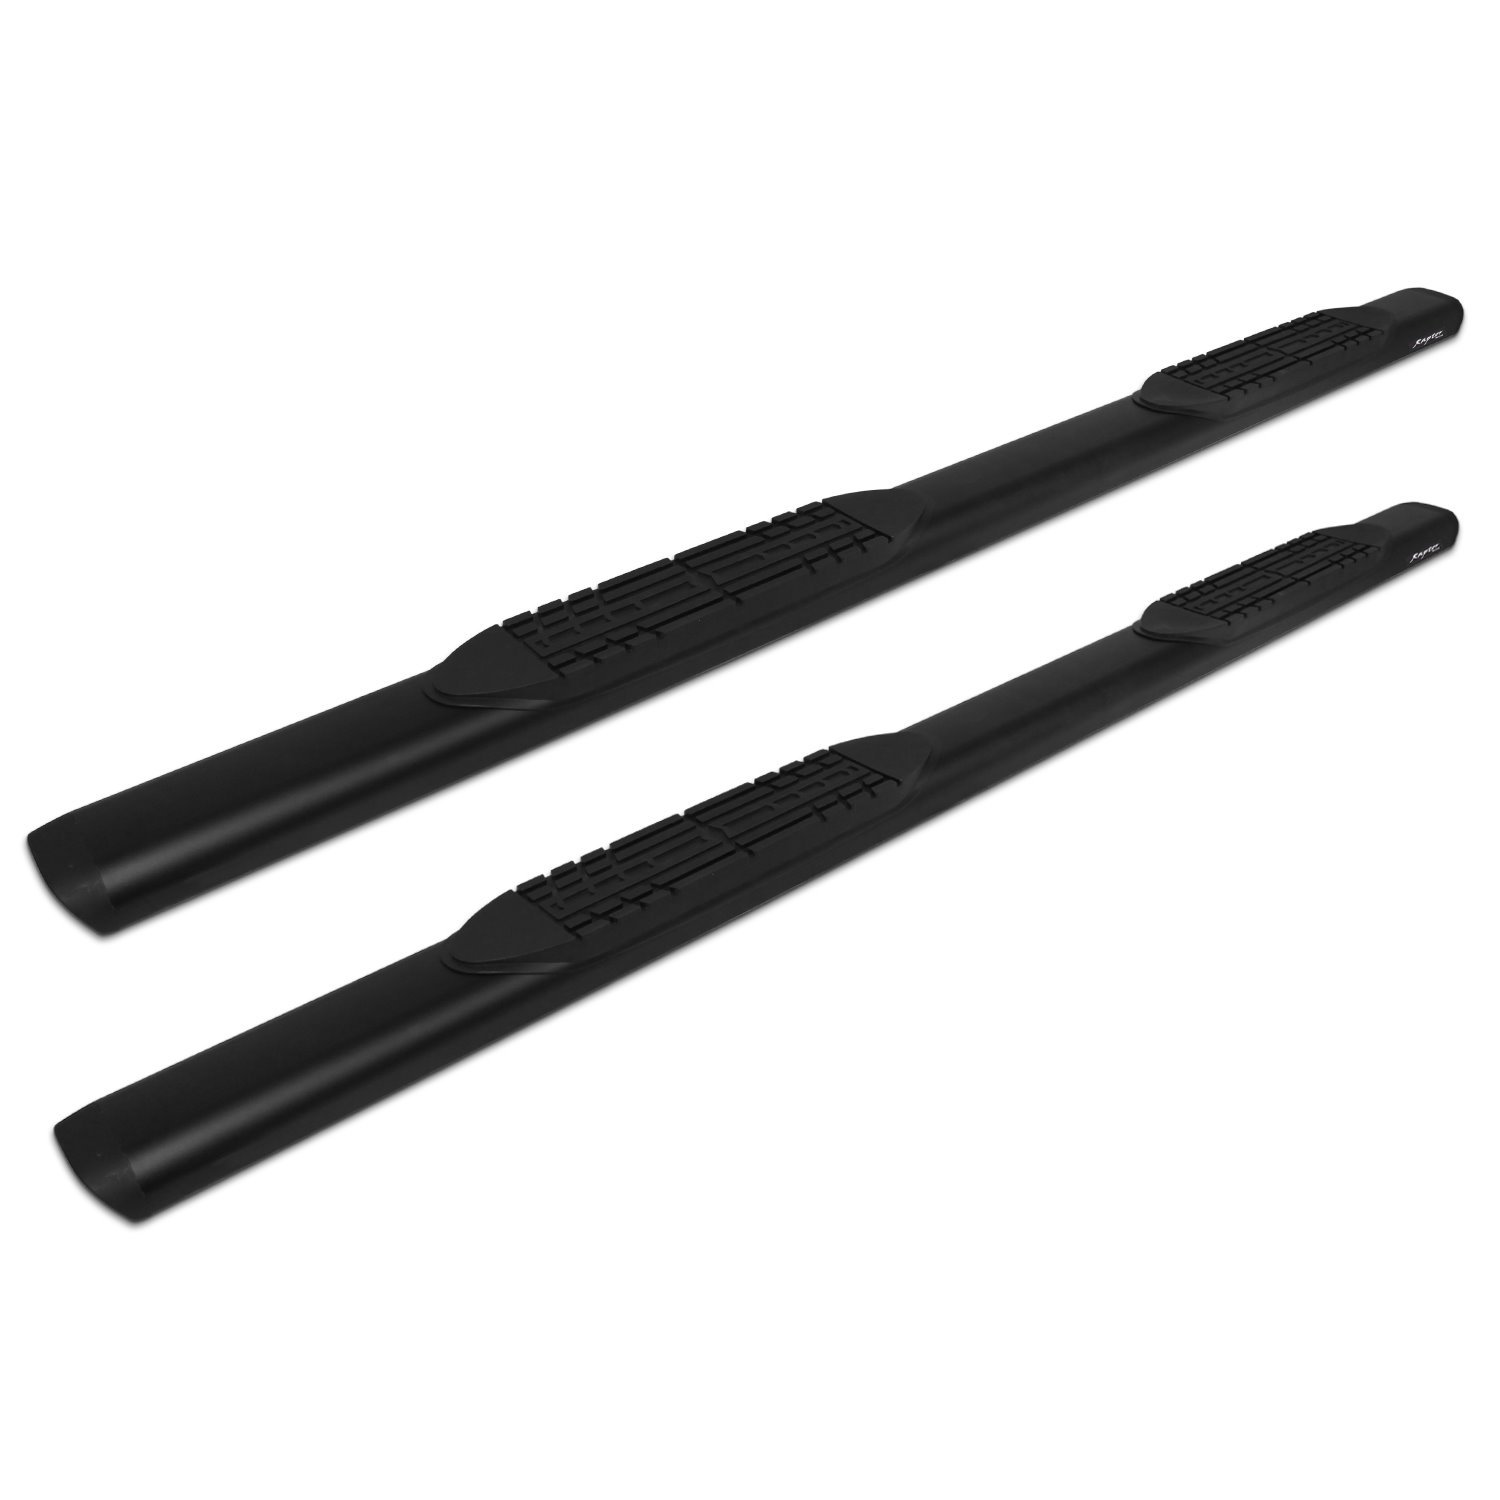 2004-0142BT 5 in Oval Style Slide Track Running Boards, Black Aluminum, Fits Select Toyota Tundra CrewMax Cab